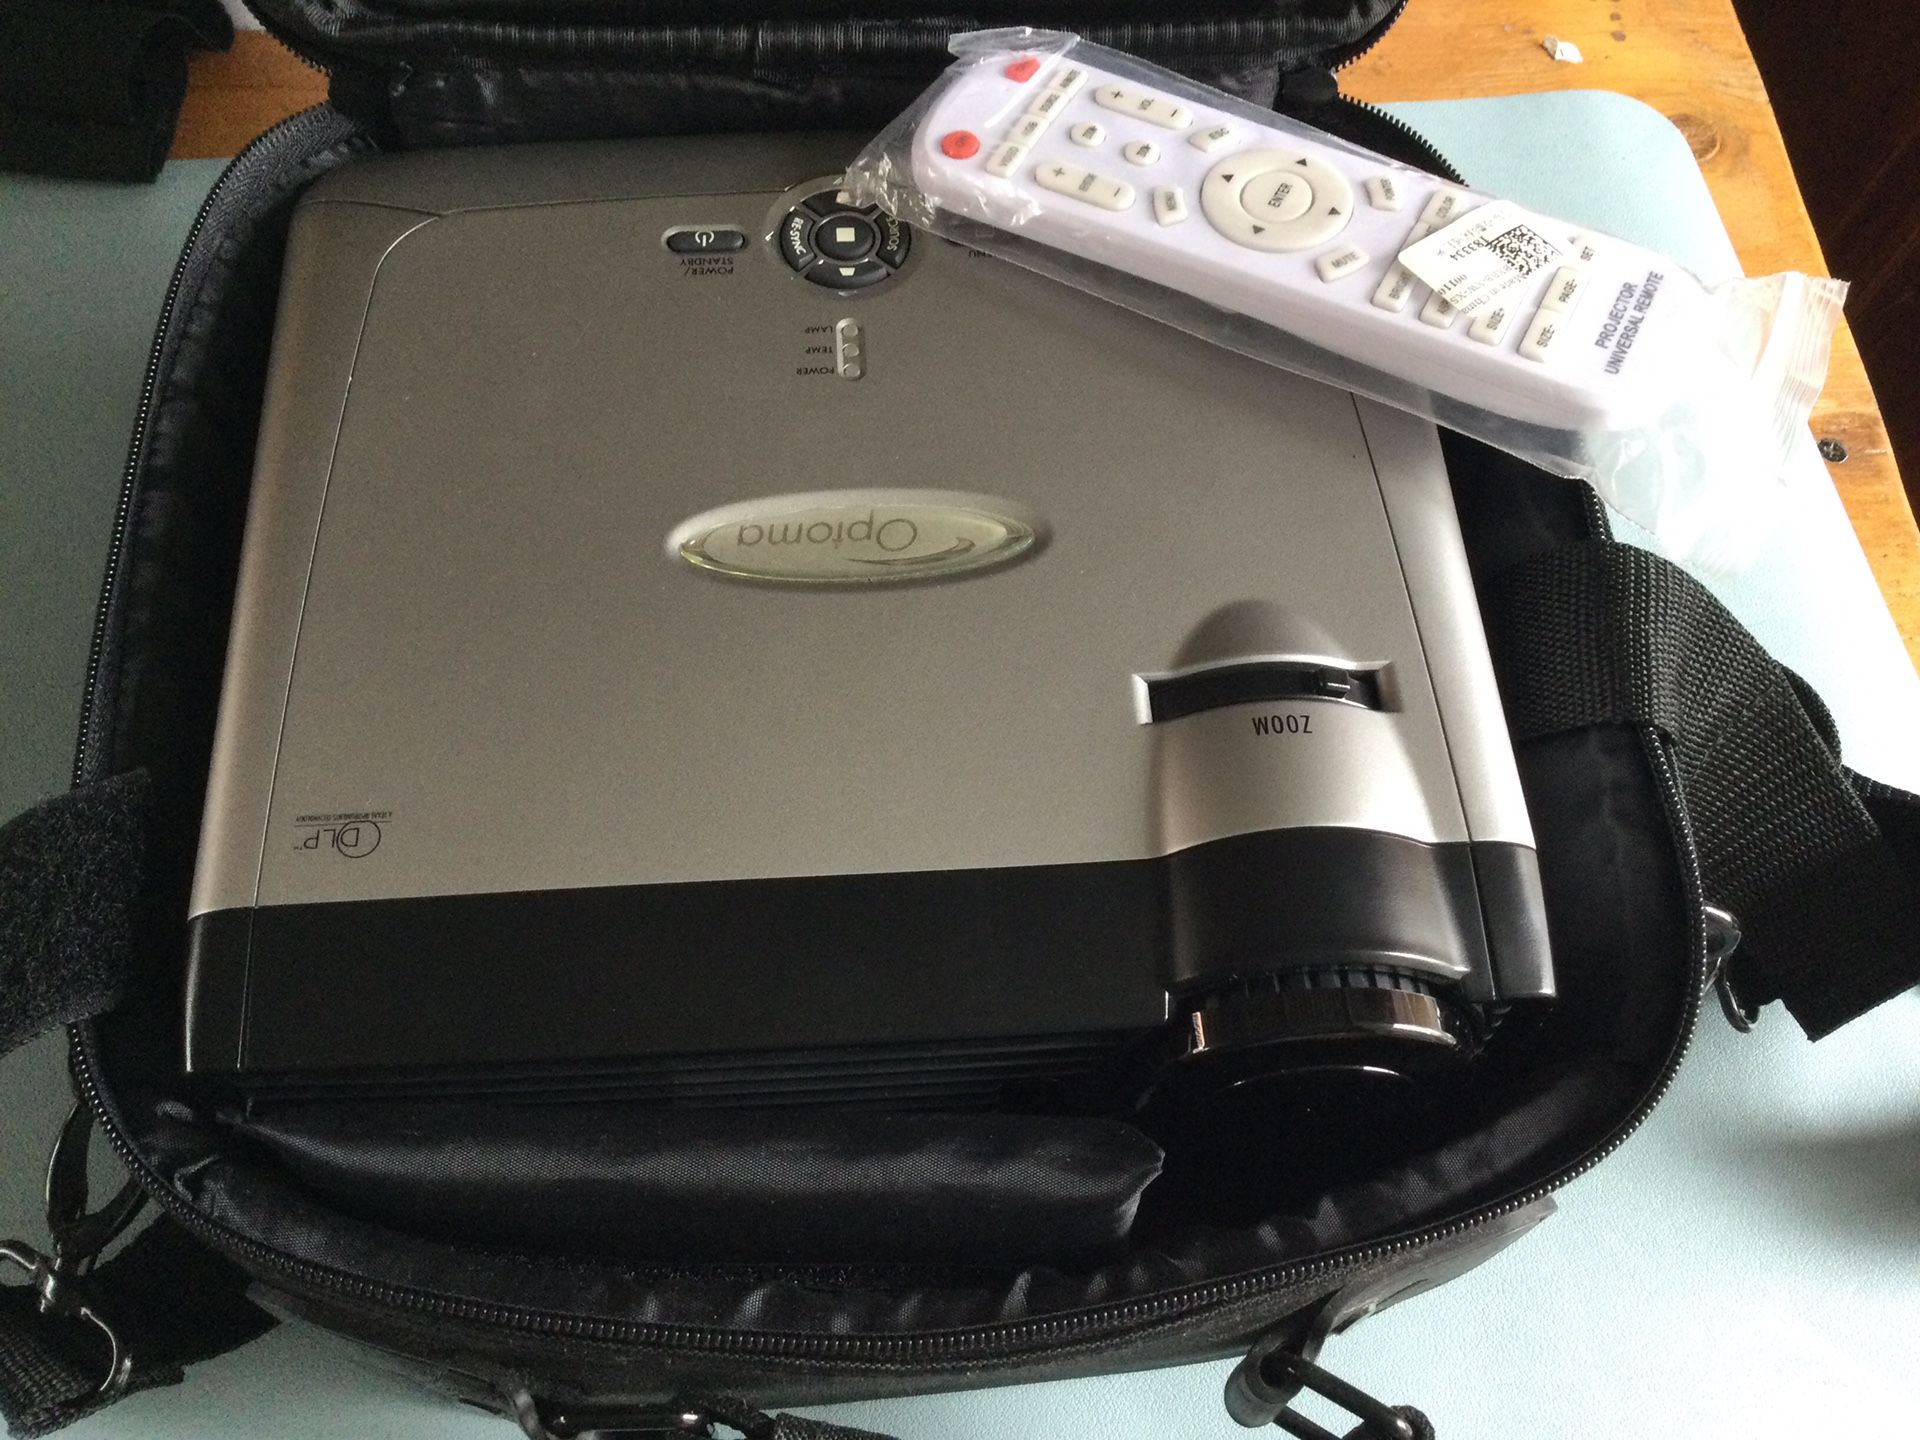 USED Optoma DX605 Presentation DLP Projector With Cables, Traveling Case, VGA to RGB, Remote. $30.00 ..SOUTH GATE pick up